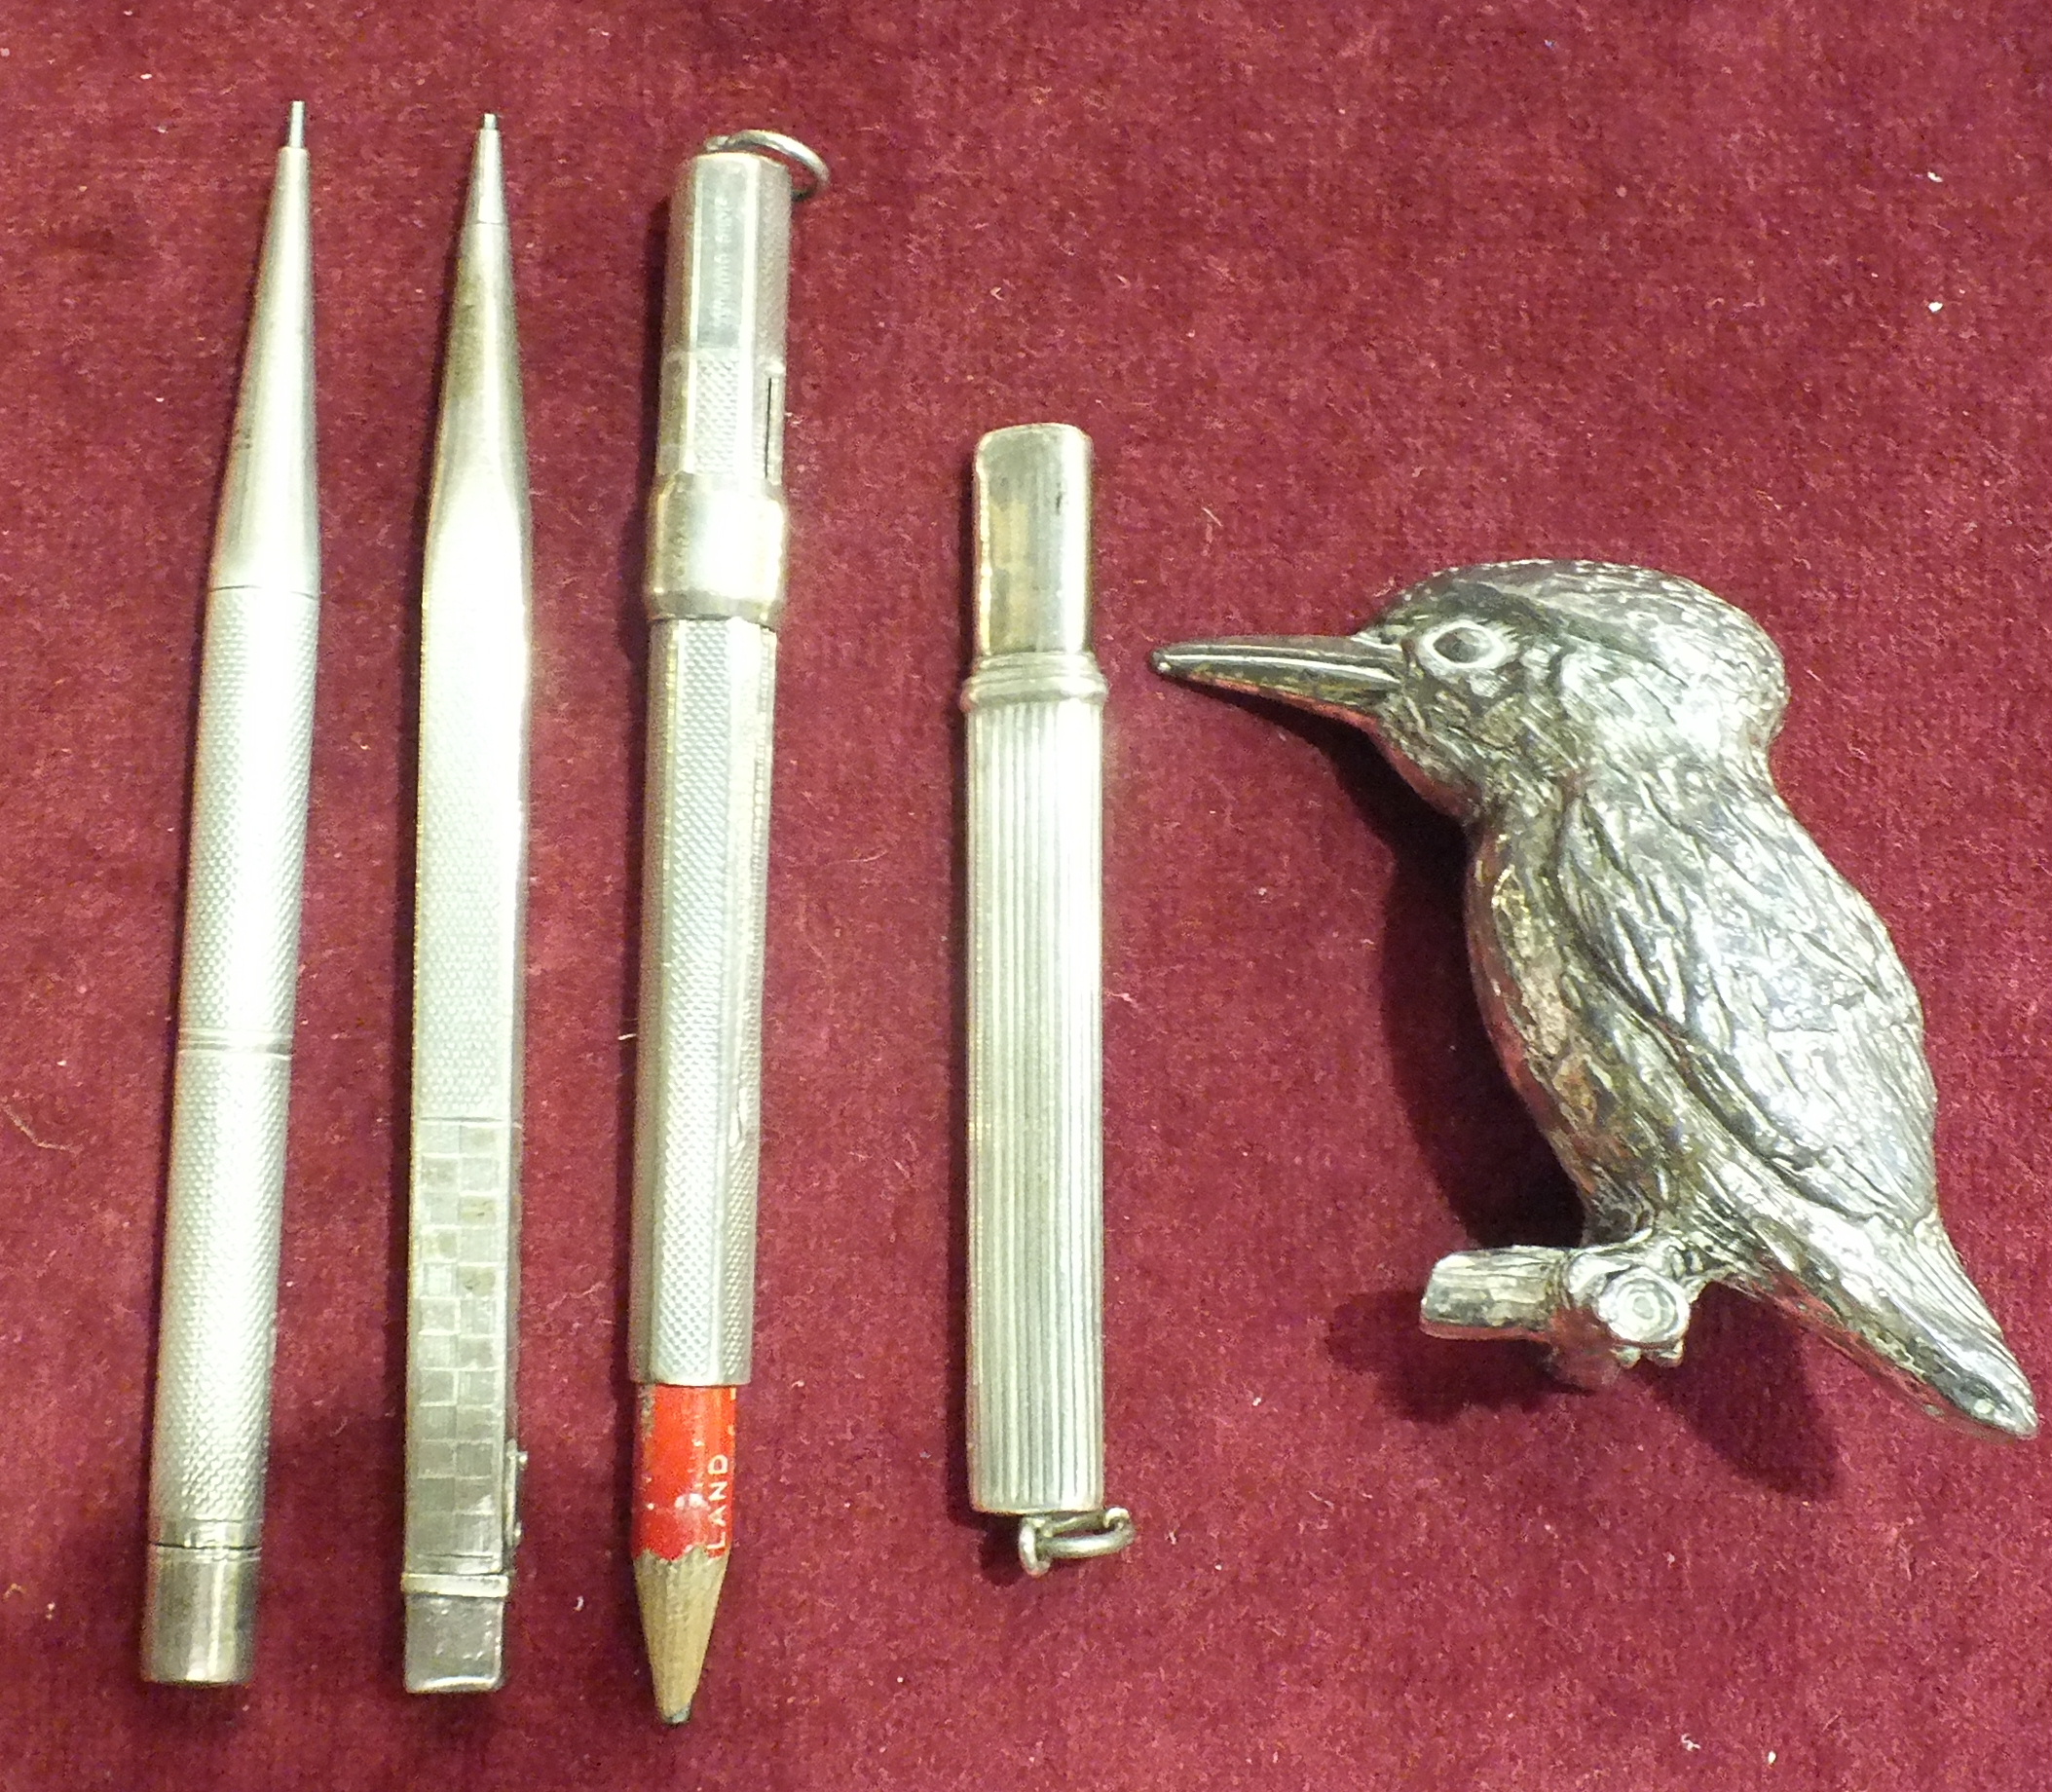 Two silver pencil holders, a silver propelling pencil and other items.